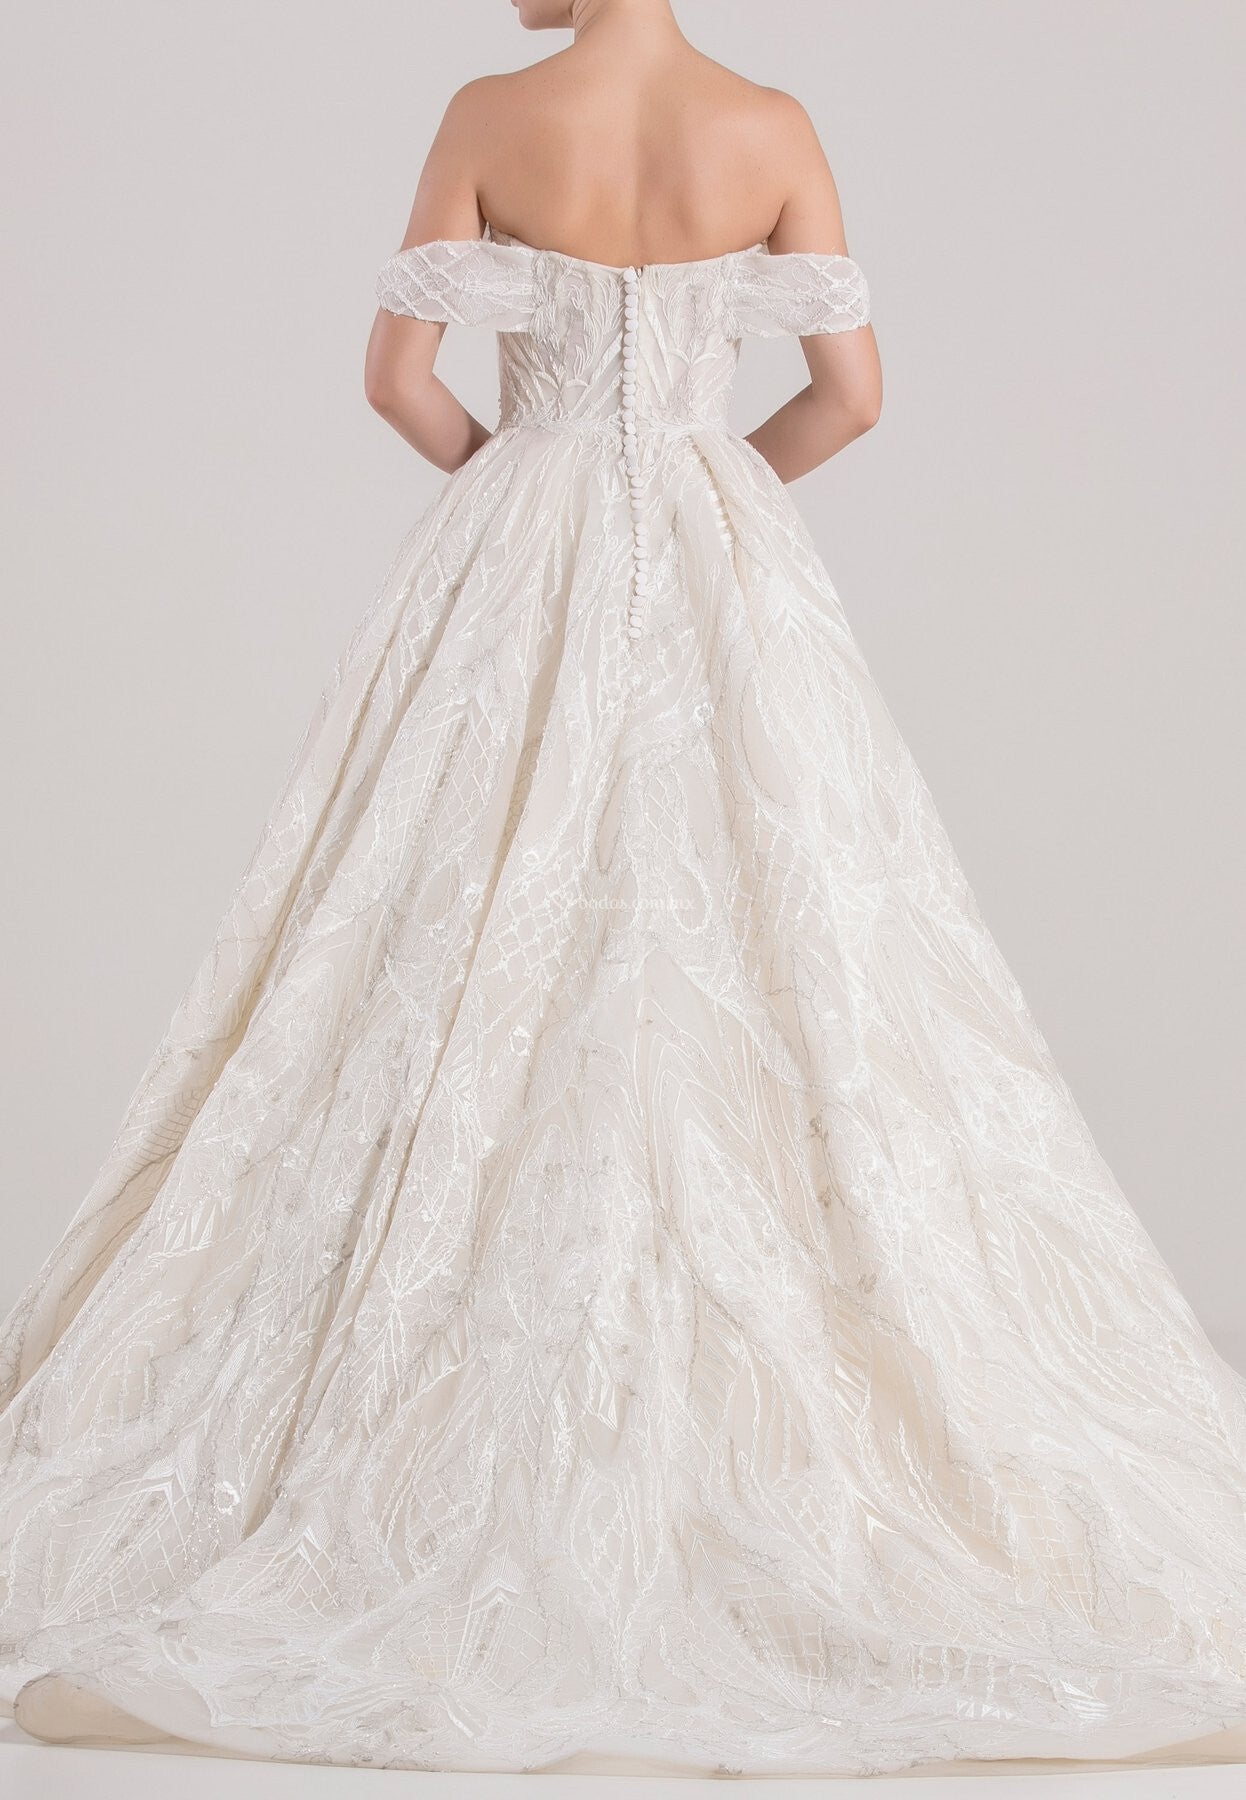 A stunning wedding dress that uses Hortense lace